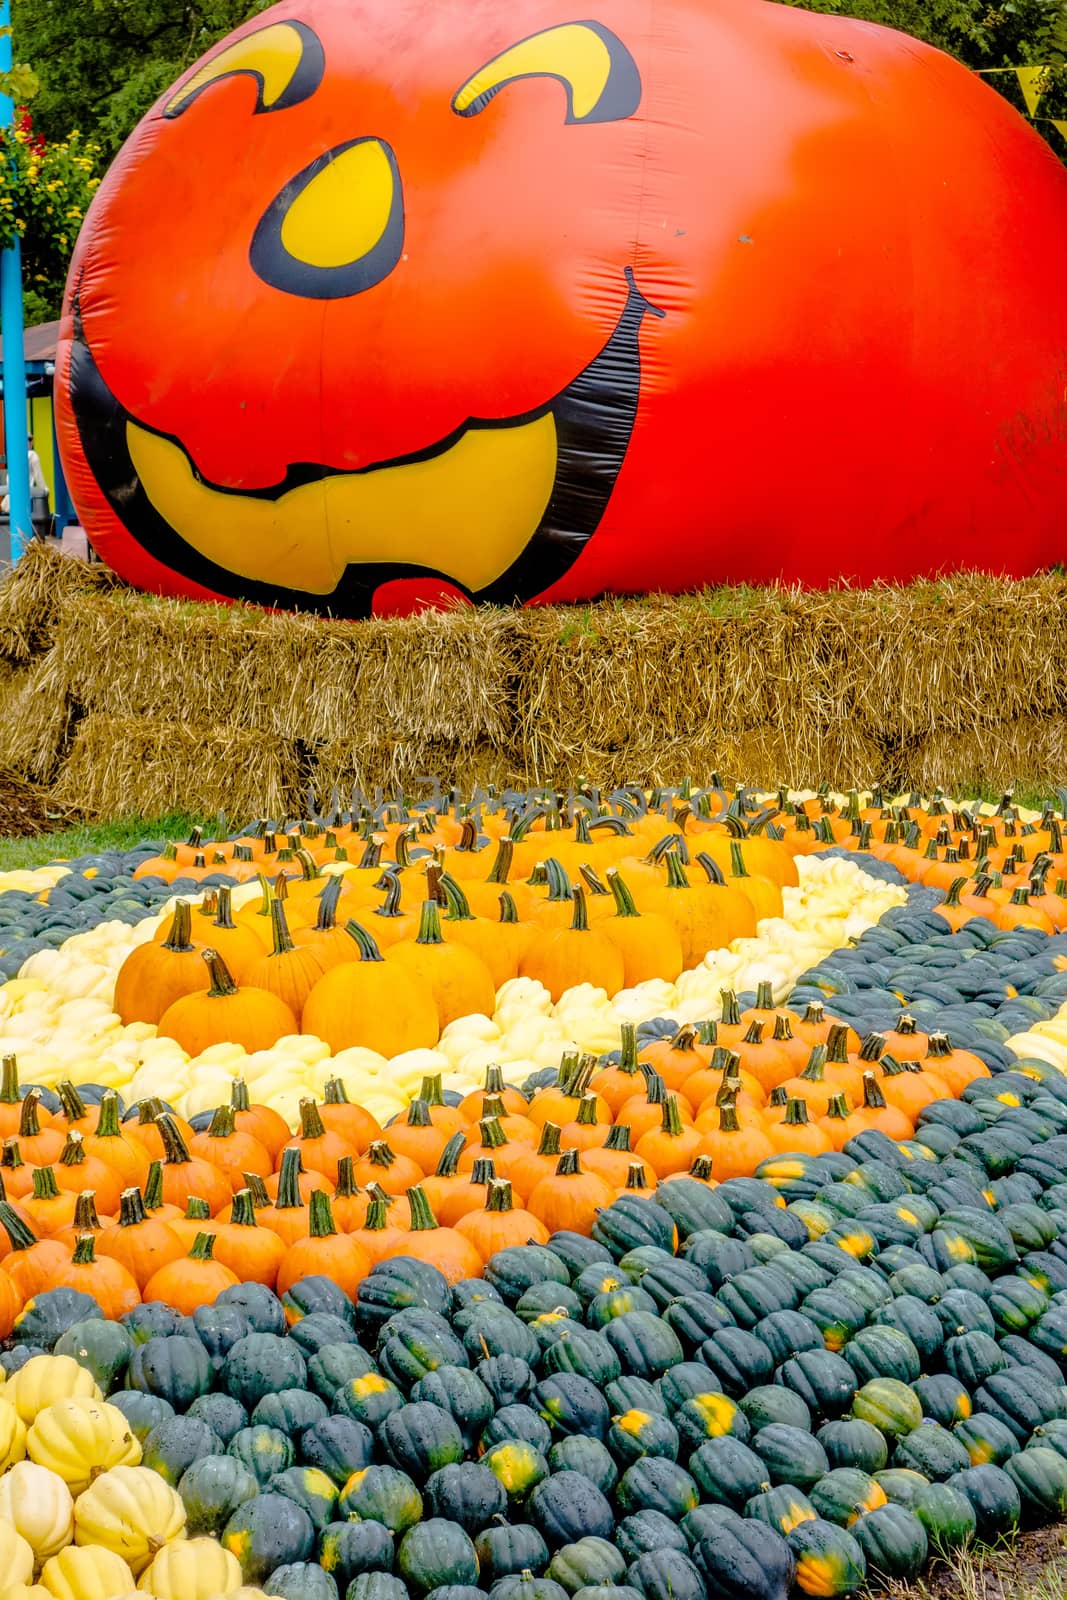 pumpkin and harvest decorations for the holidays by digidreamgrafix